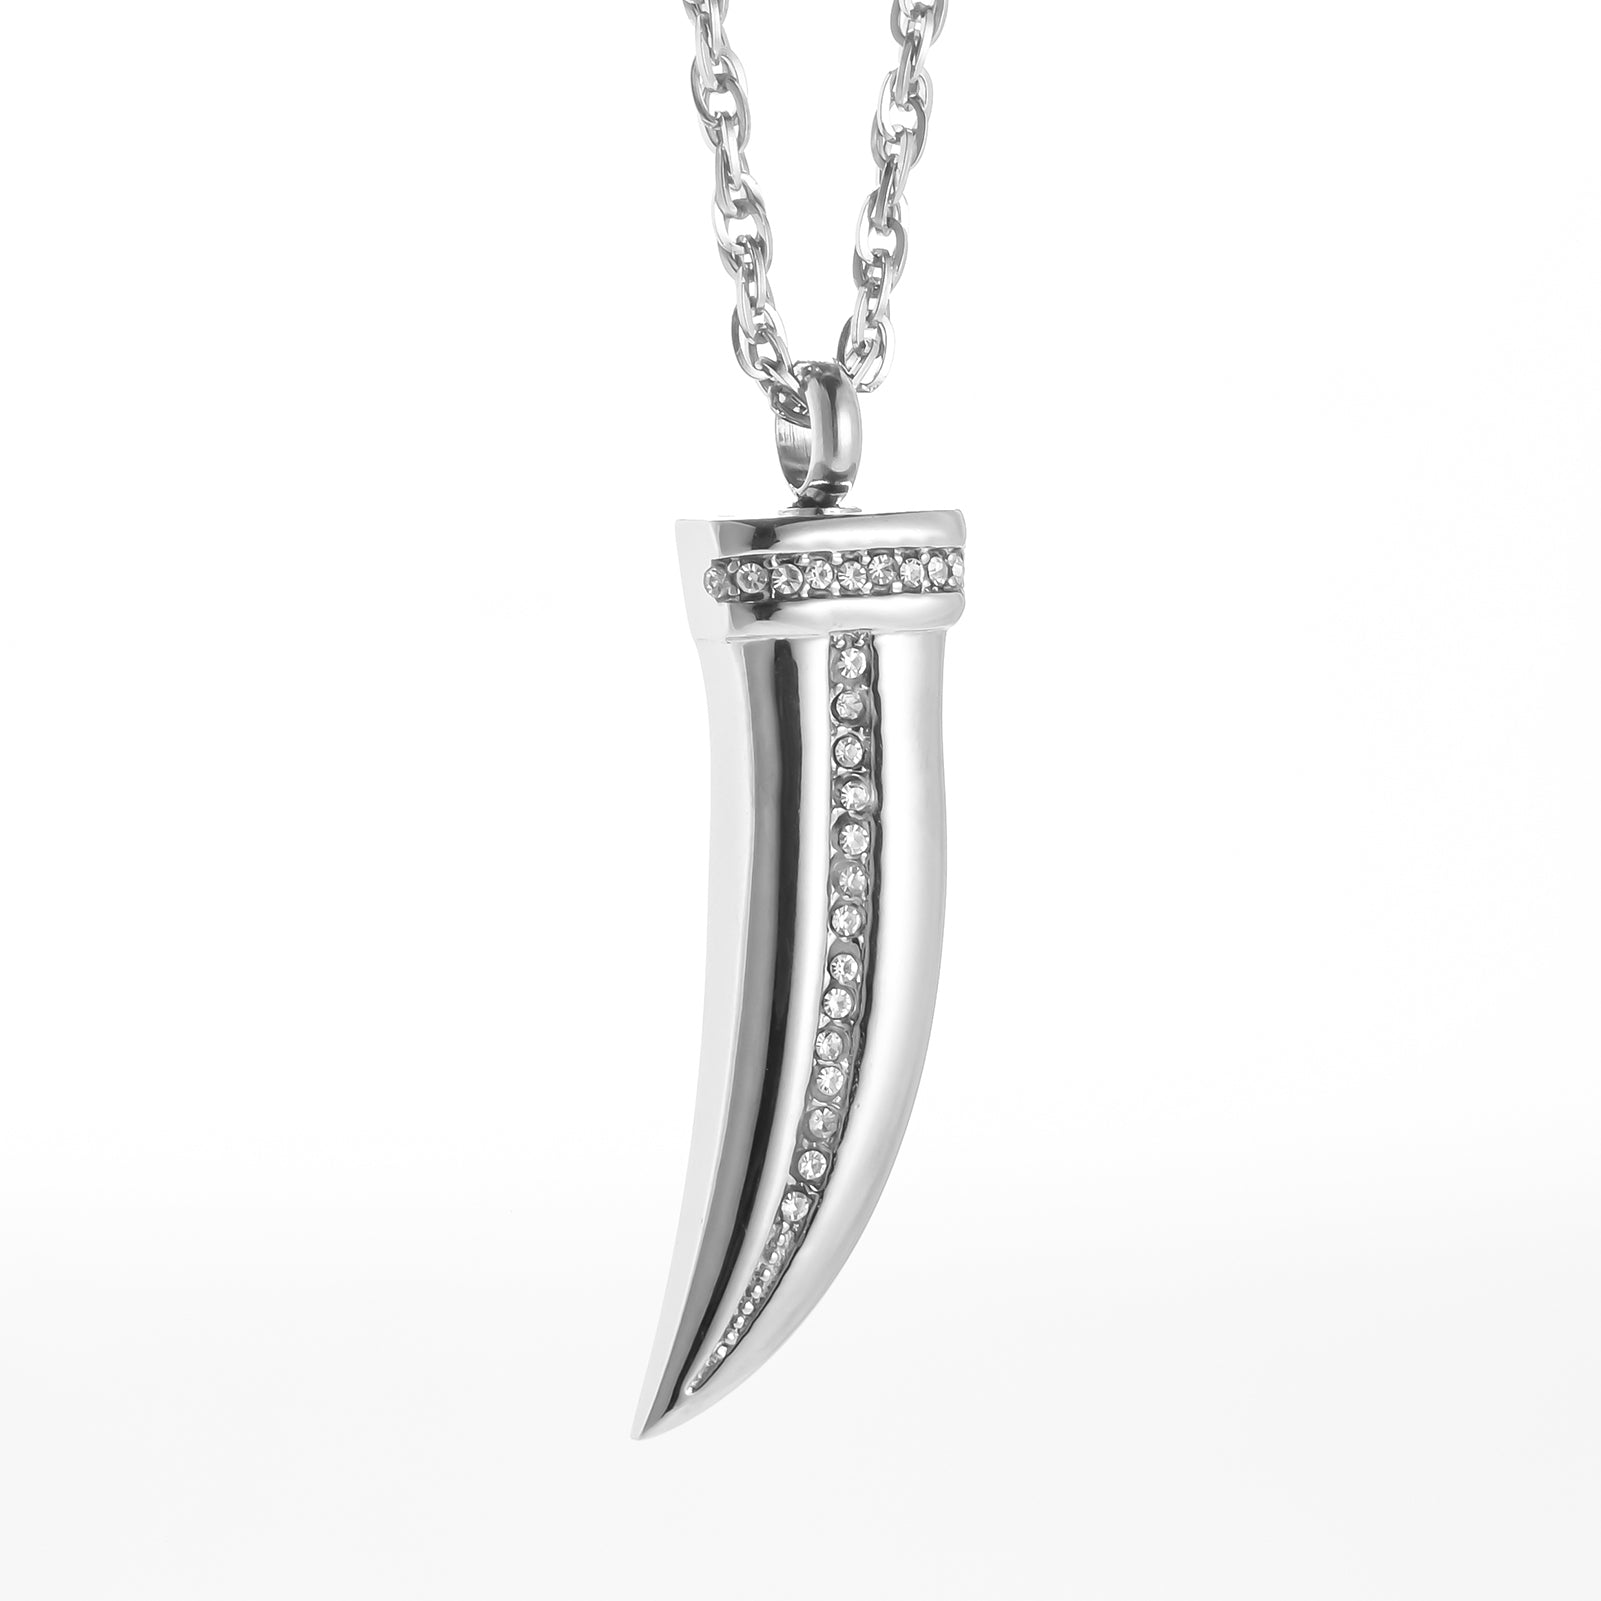 Dagger Cremation Jewelry with Zircon for Ashes